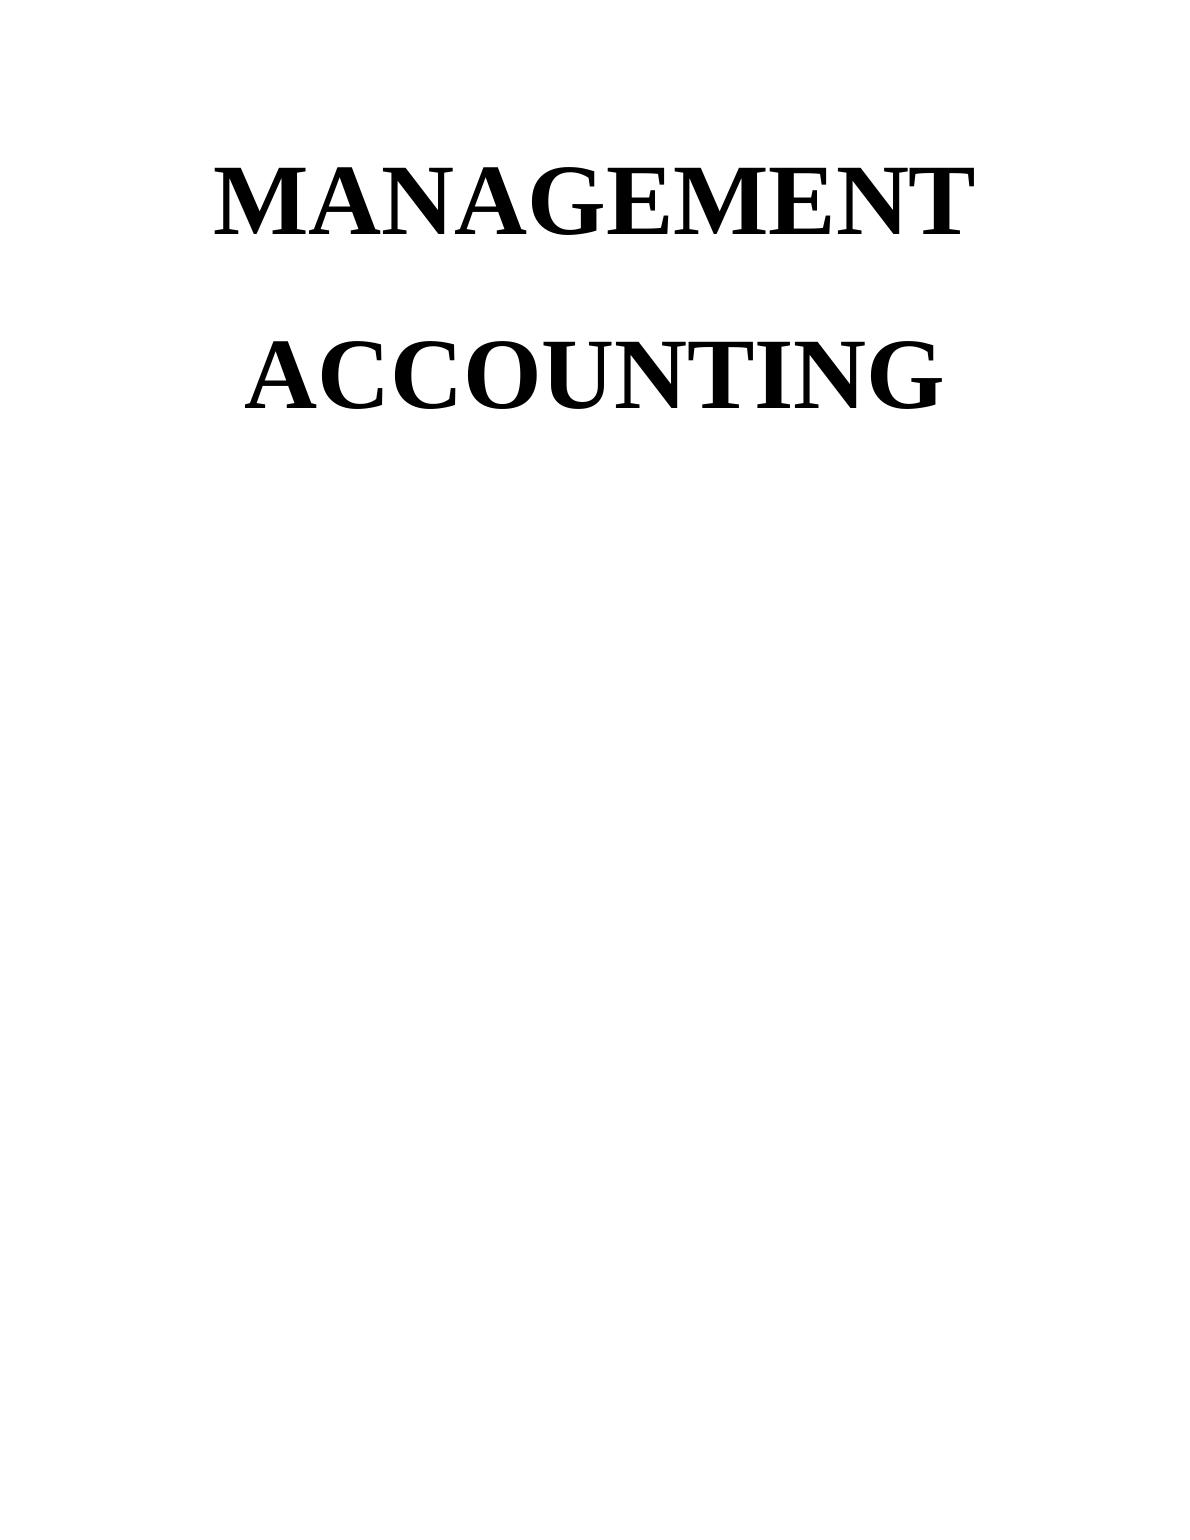 Report on the Dynamics of Management Accounting_1